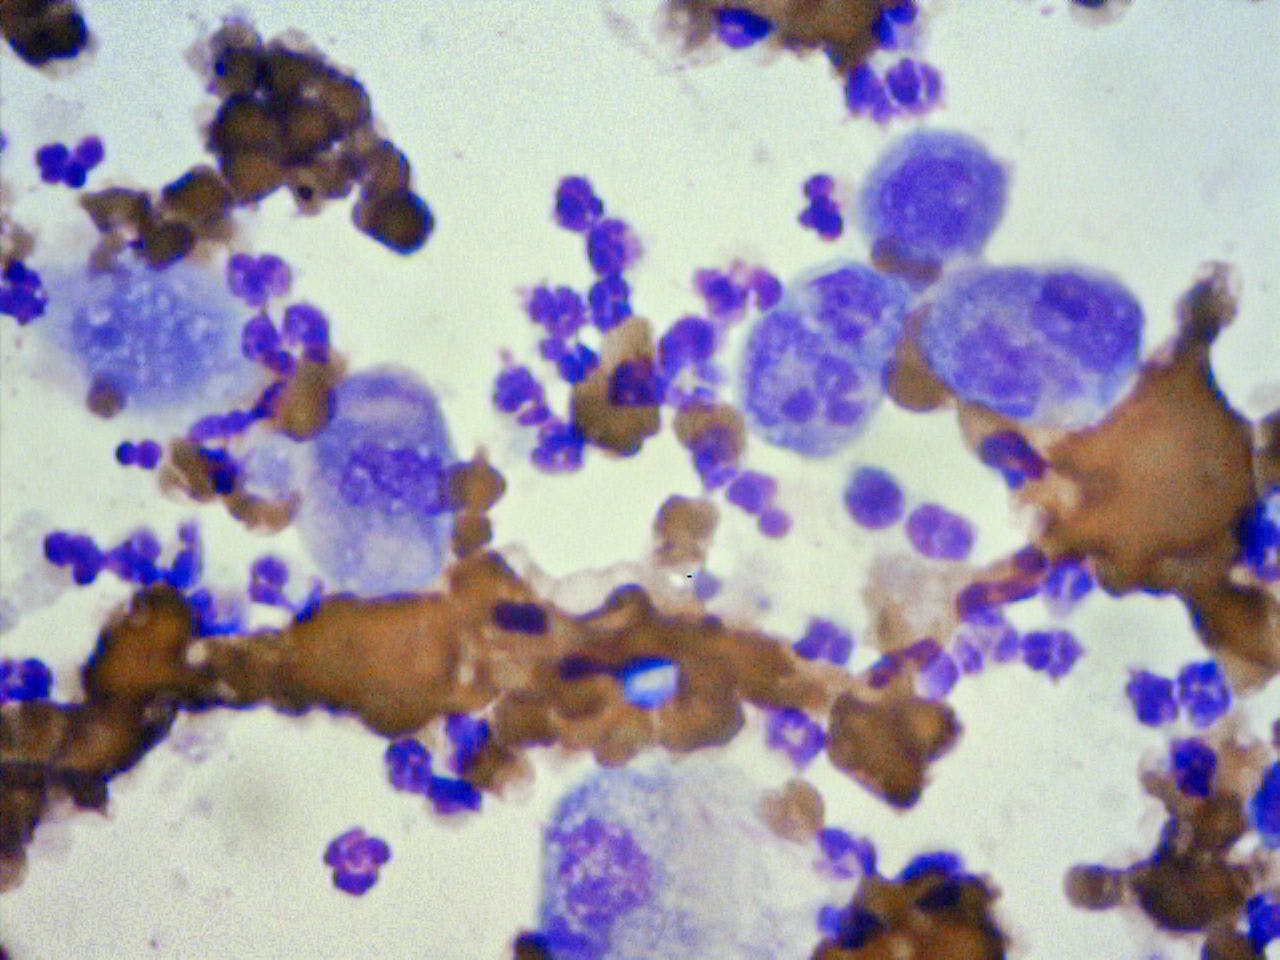 Figure 9B: Cytologic criteria of malignancy include increased nuclear/cytoplasm ratio, nuclear and nucleolar pleomorphism consistent with squamous cell carcinoma.